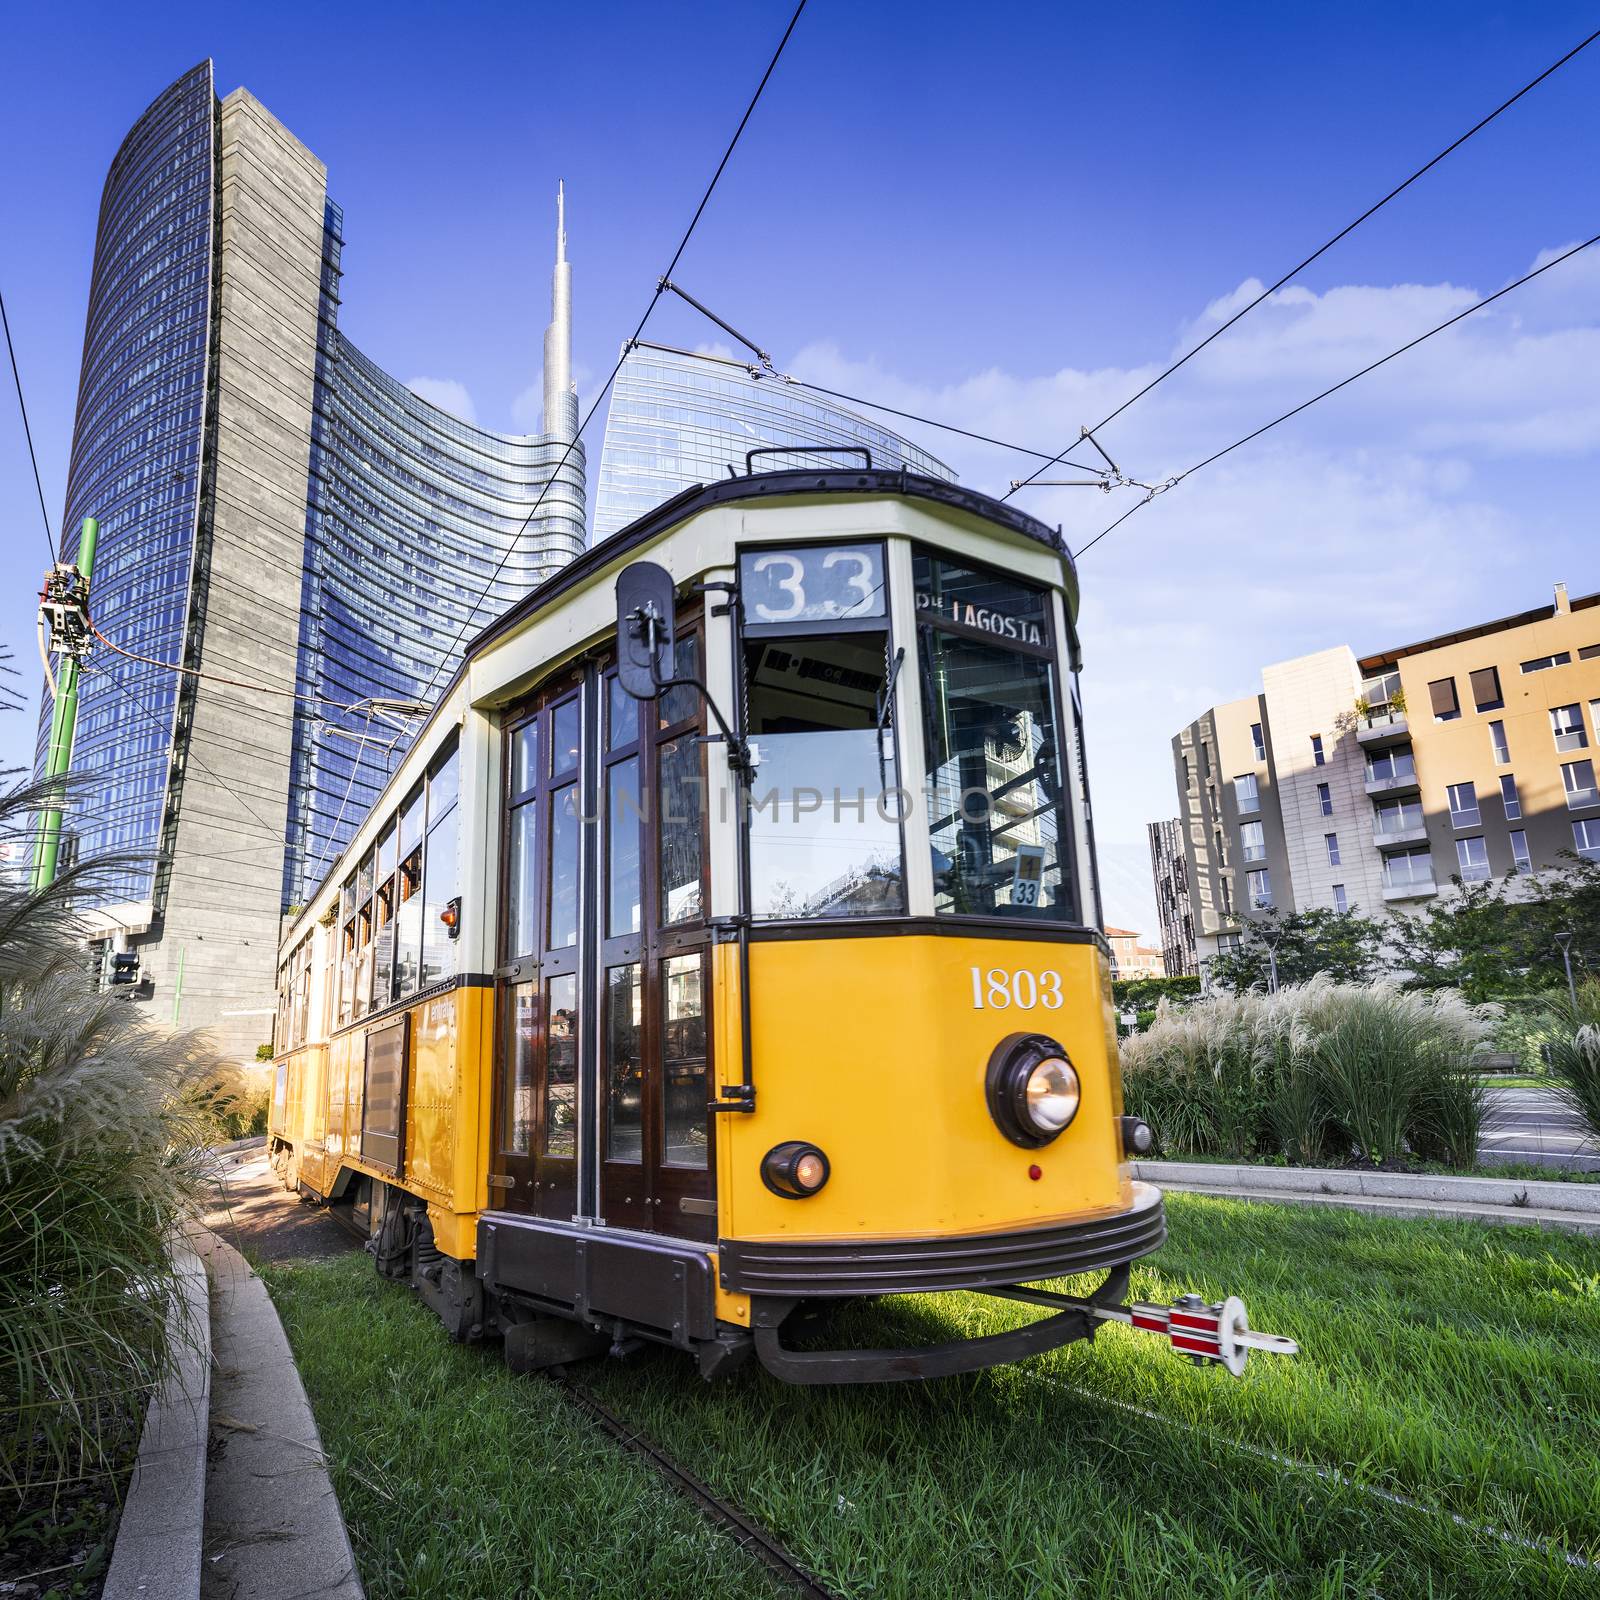 Vintage tram on the Milano street, Italy by ventdusud